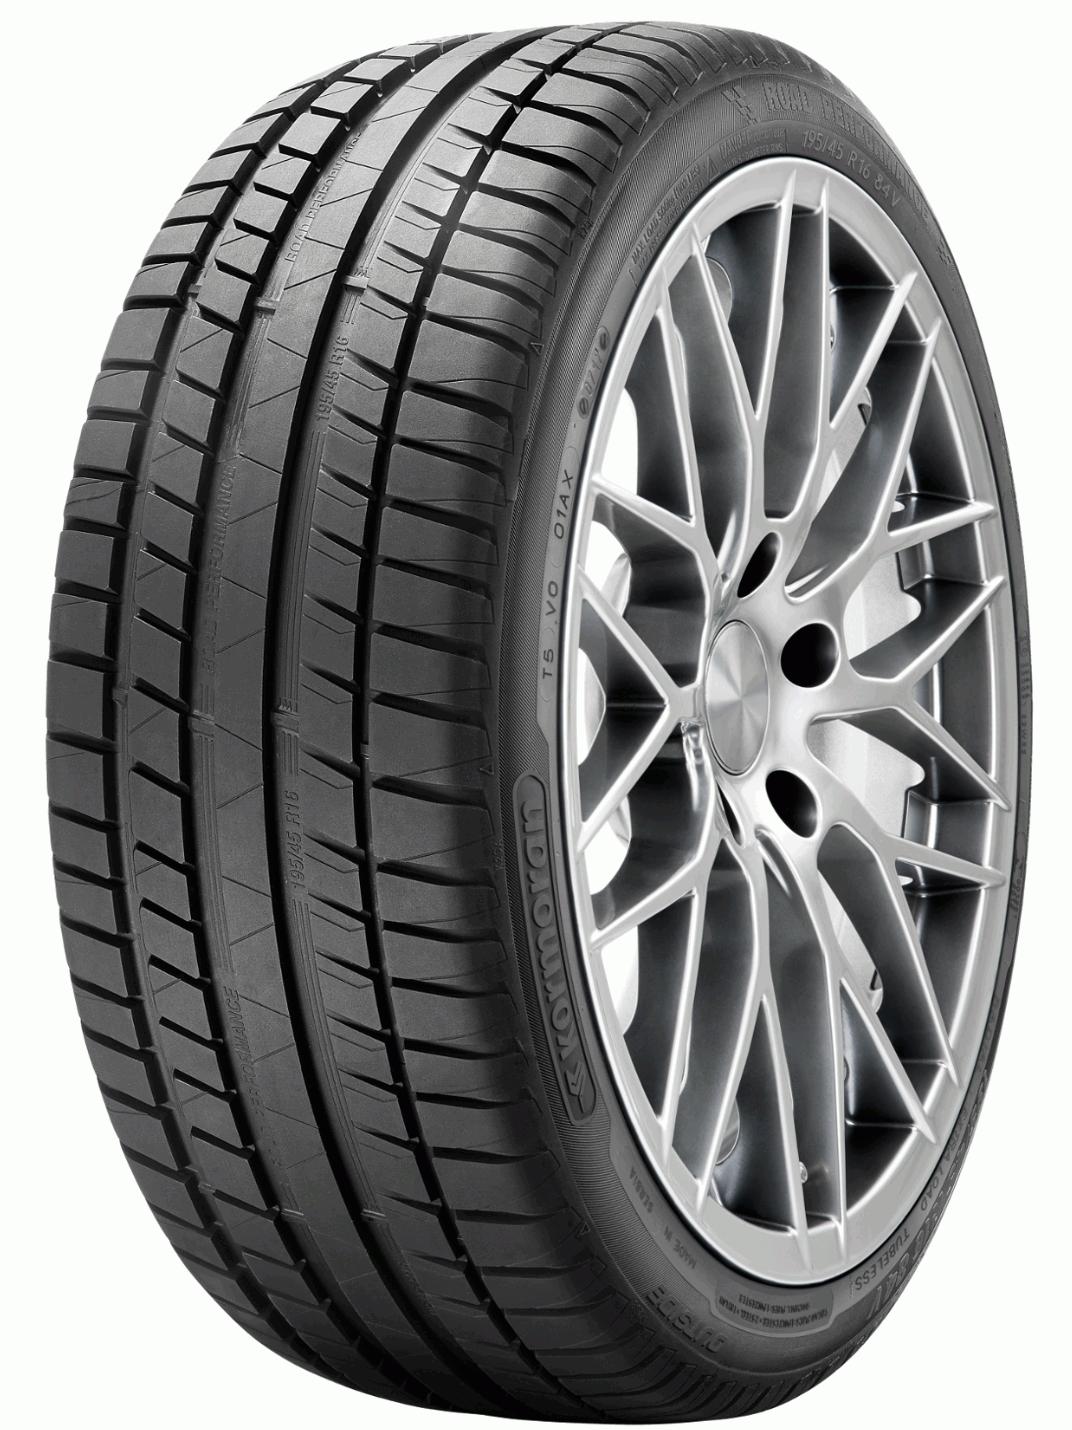 Riken Road Tire - Tests and Performance Reviews